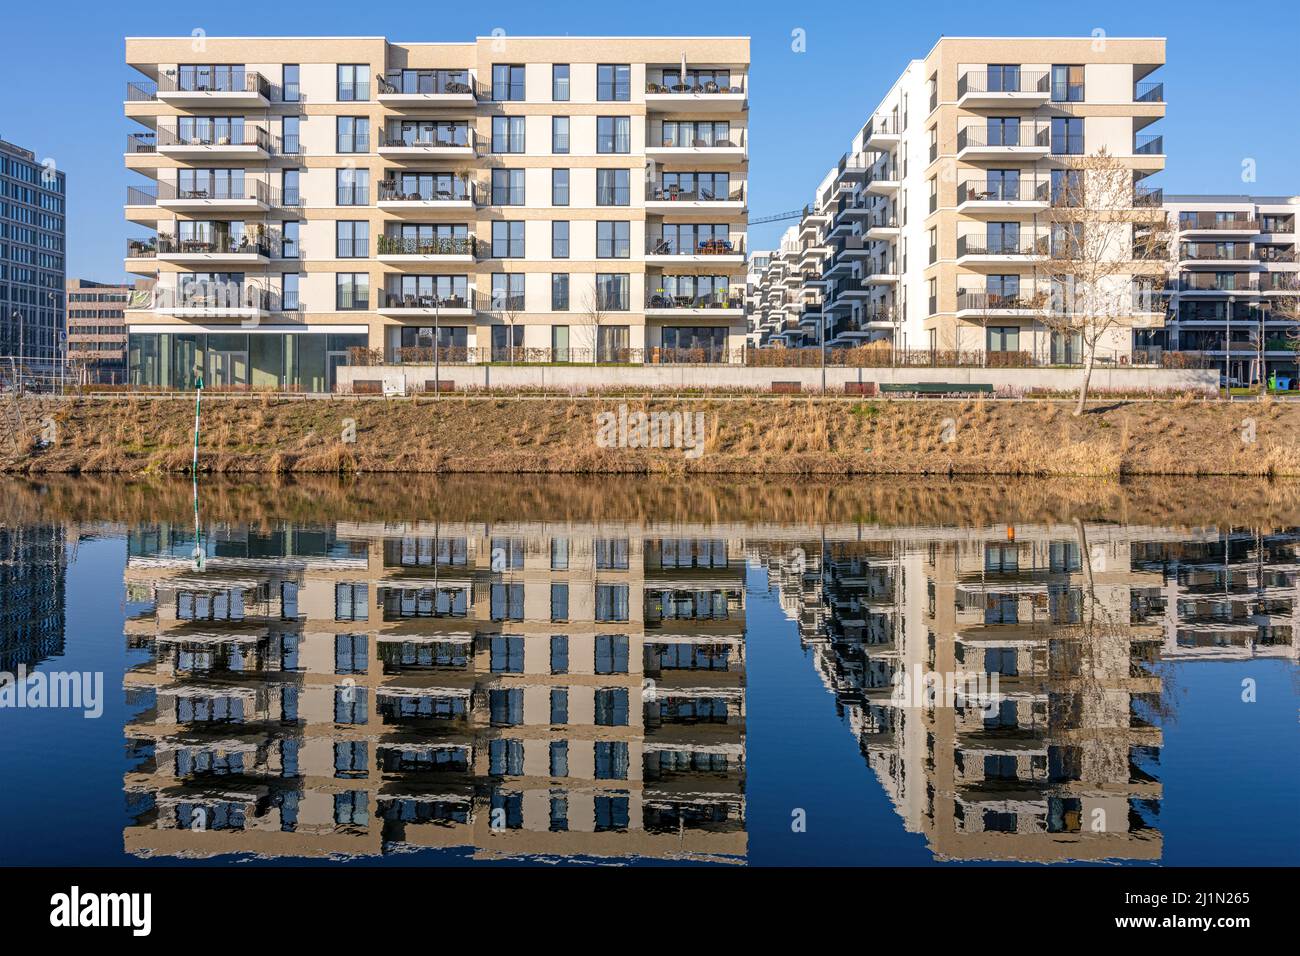 New apartment buildings reflecting in a canal seen in Berlin, Germany Stock Photo